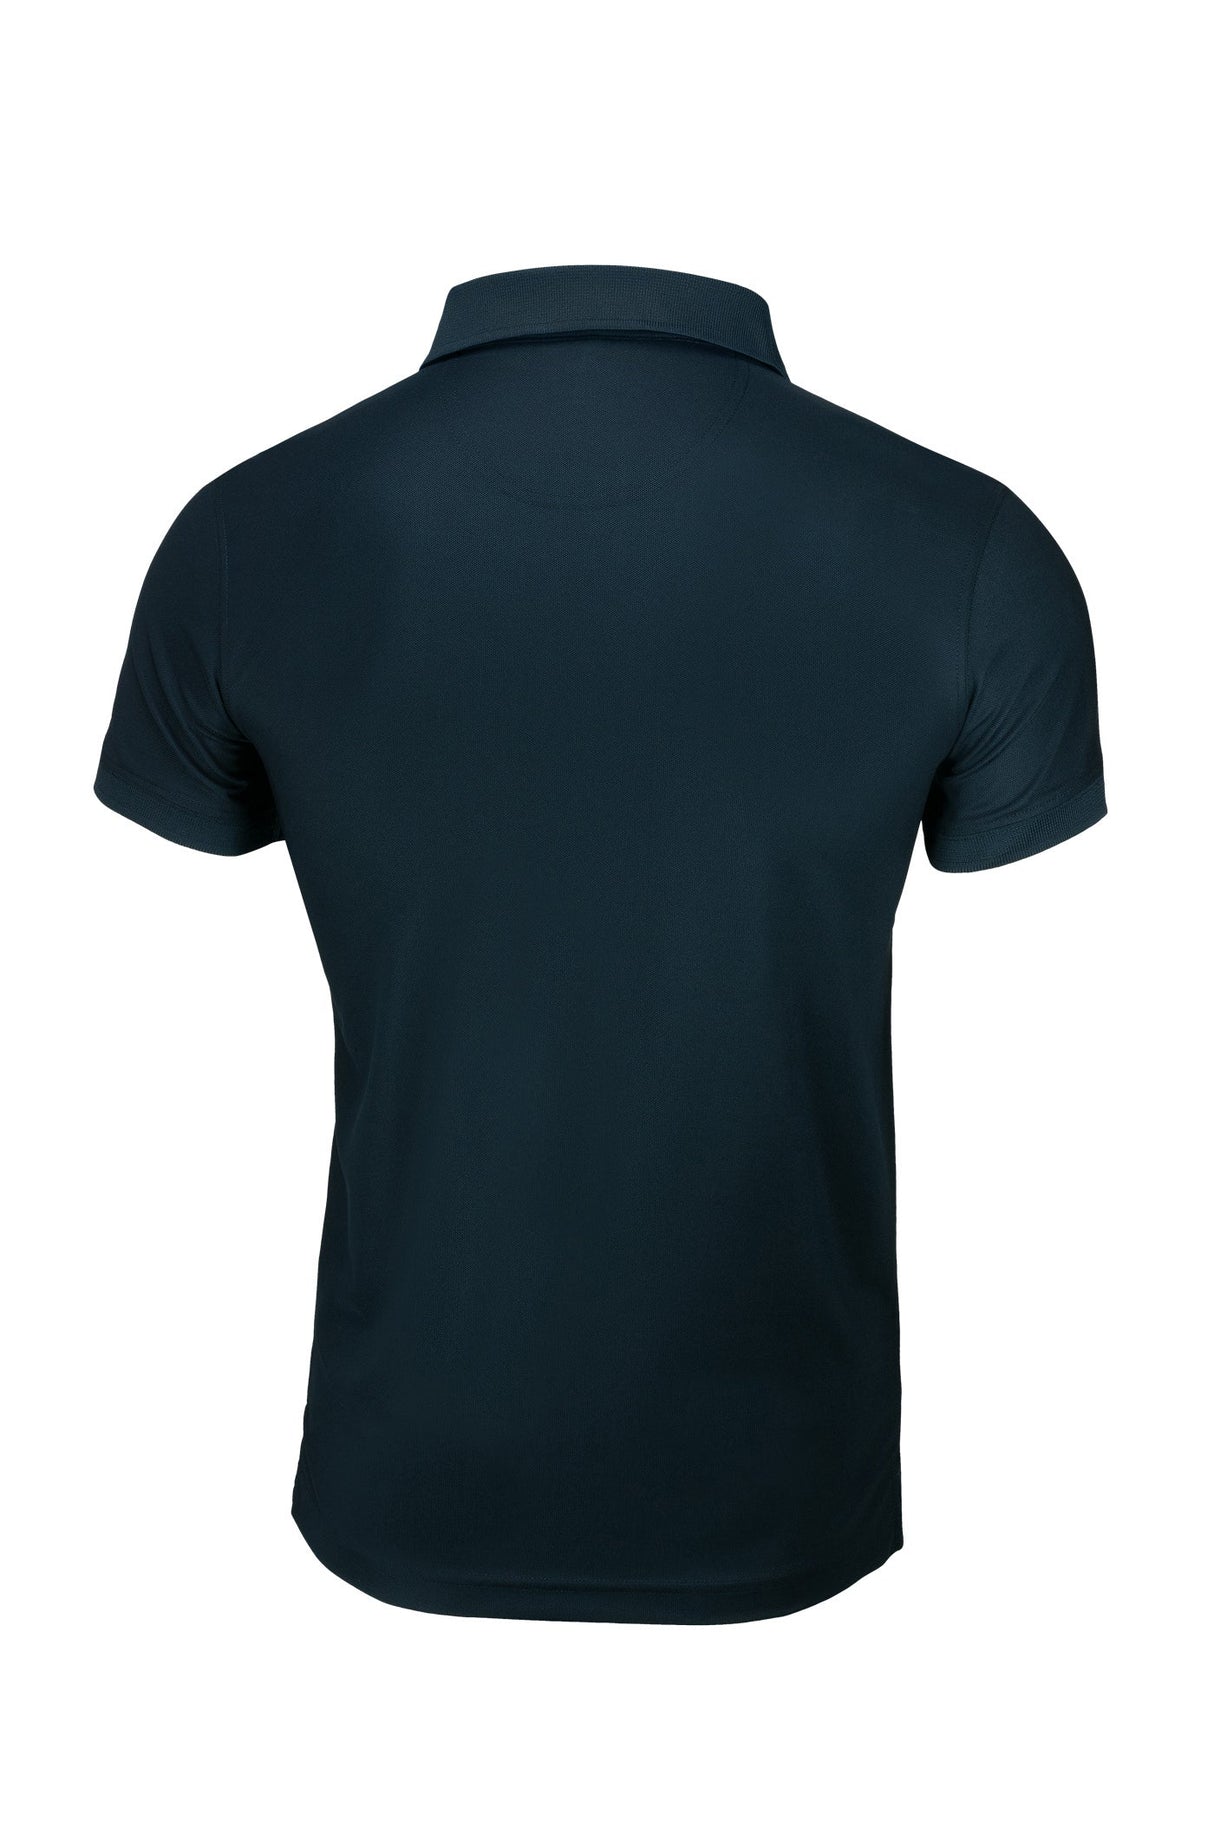 Nimbus Clearwater – Quick-Dry Performance Polo